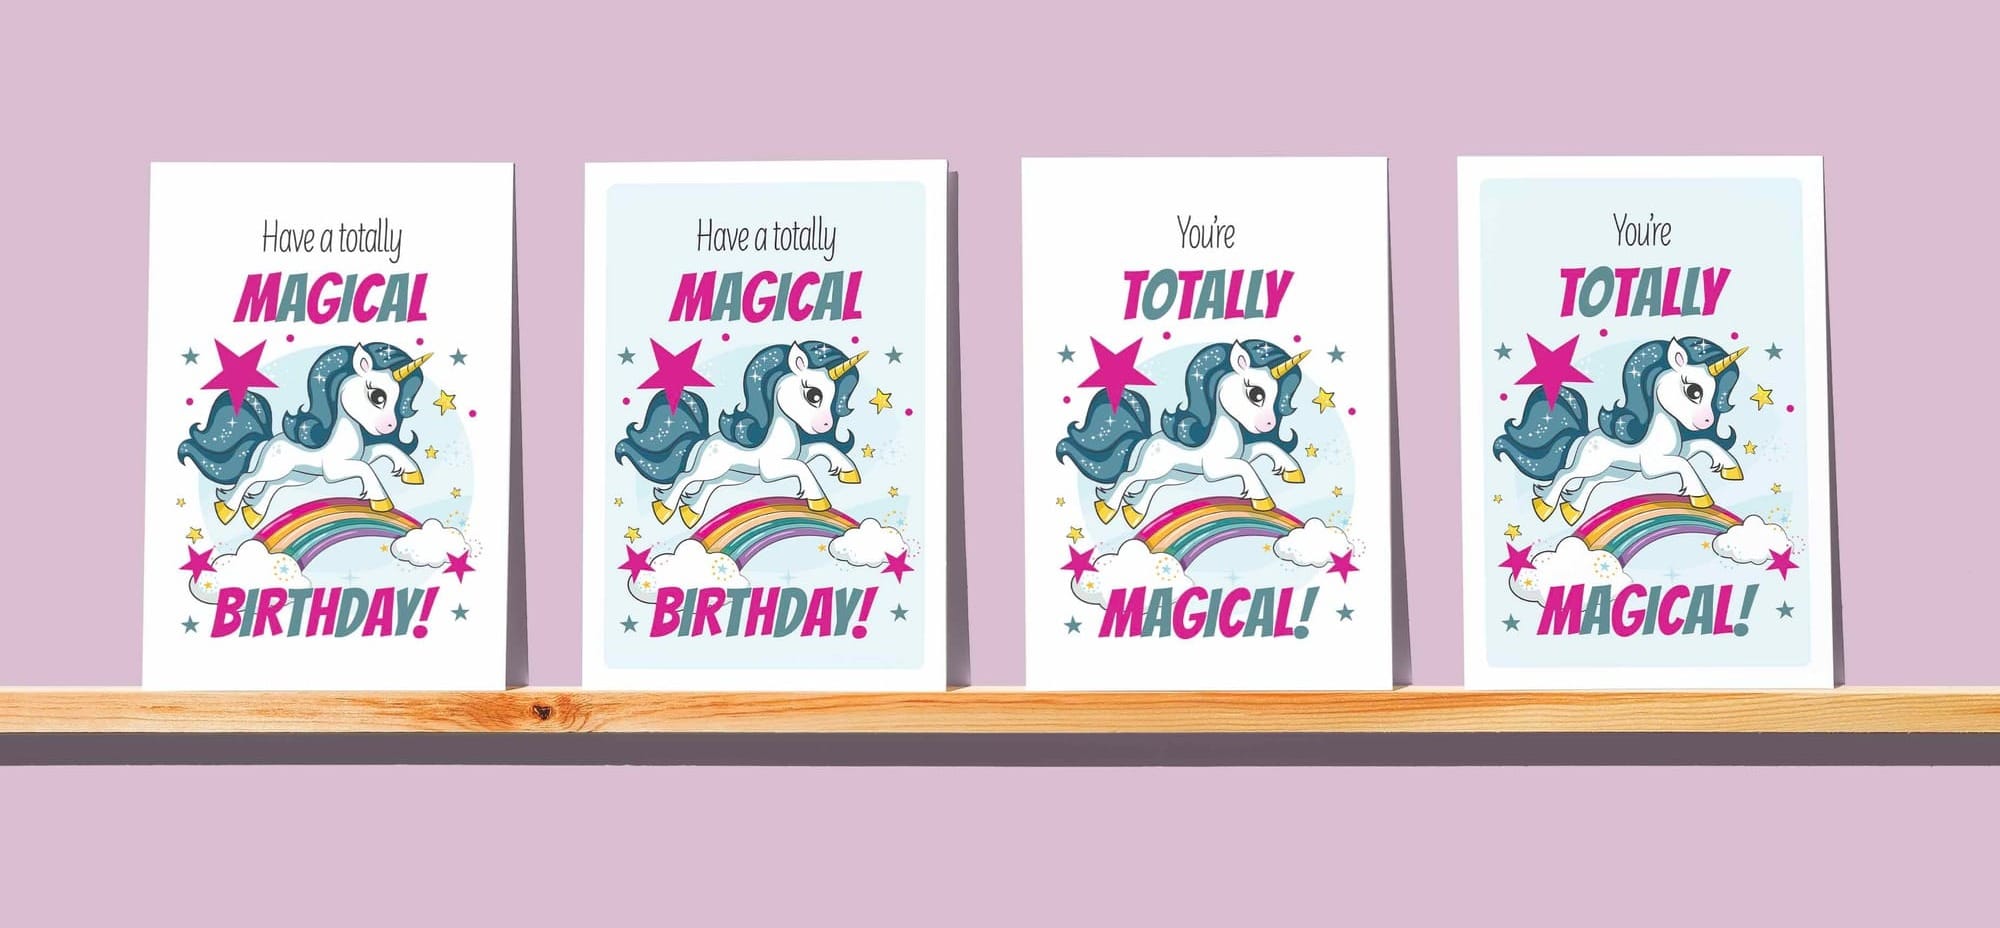 more variations of this card are available in the friendship cards section.